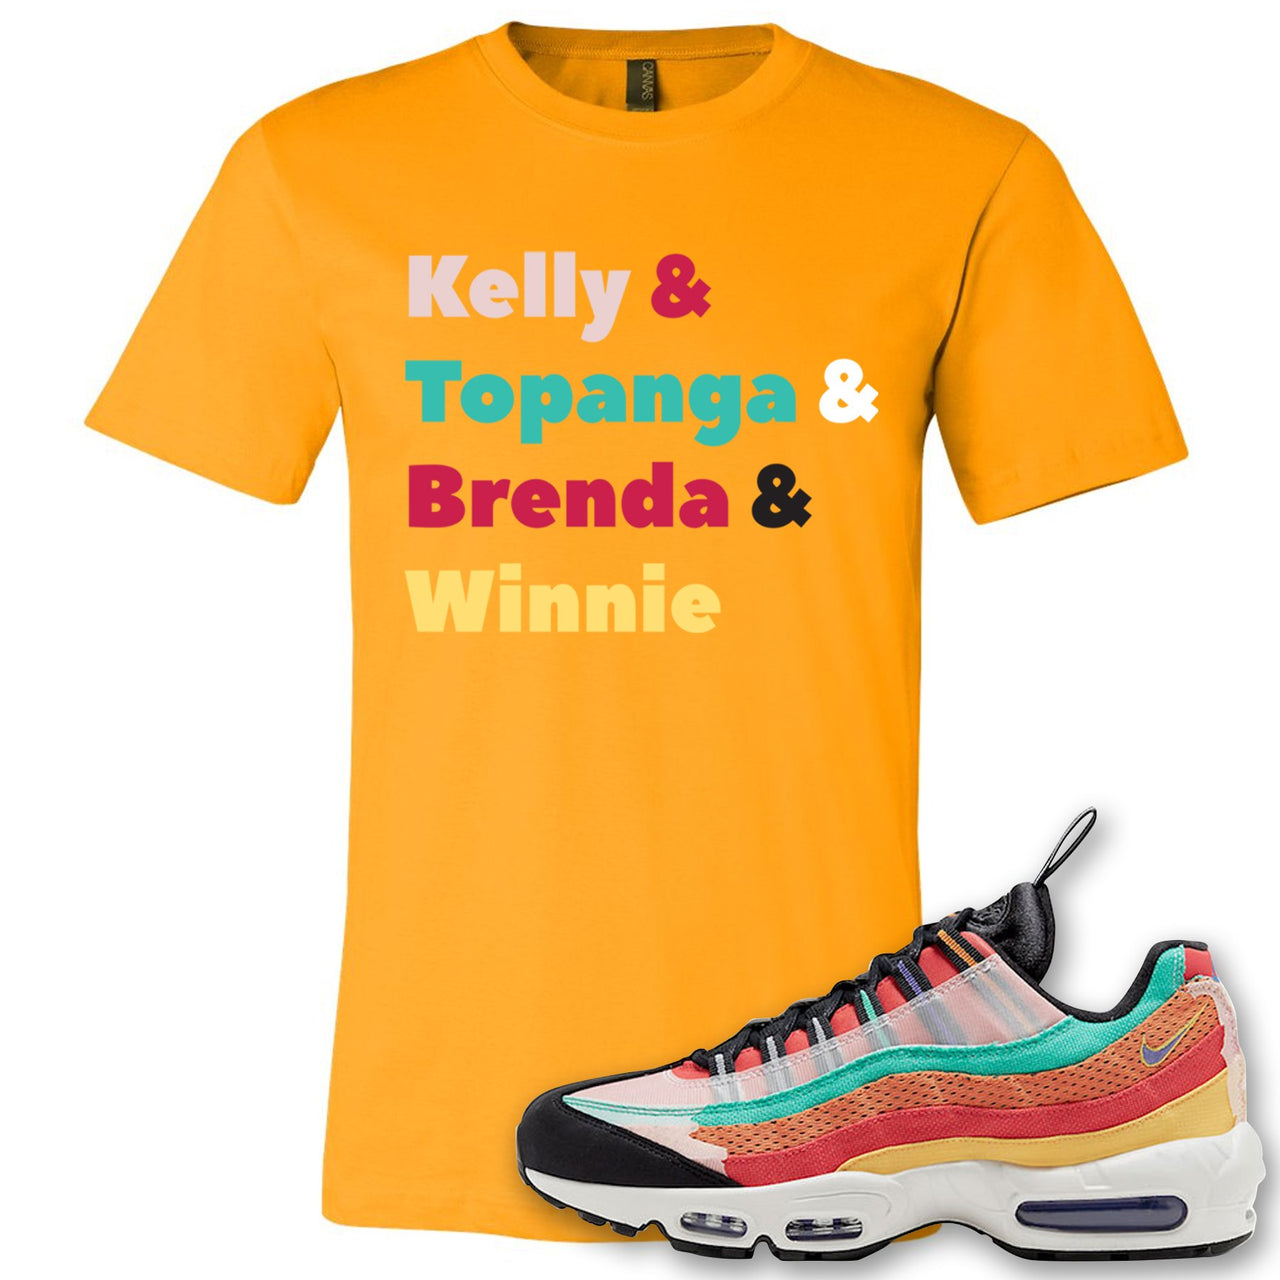 Air Max 95 Black History Month Sneaker Gold T Shirt | Tees to match Nike Air Max 95 Black History Month Shoes | Kelly And Gang